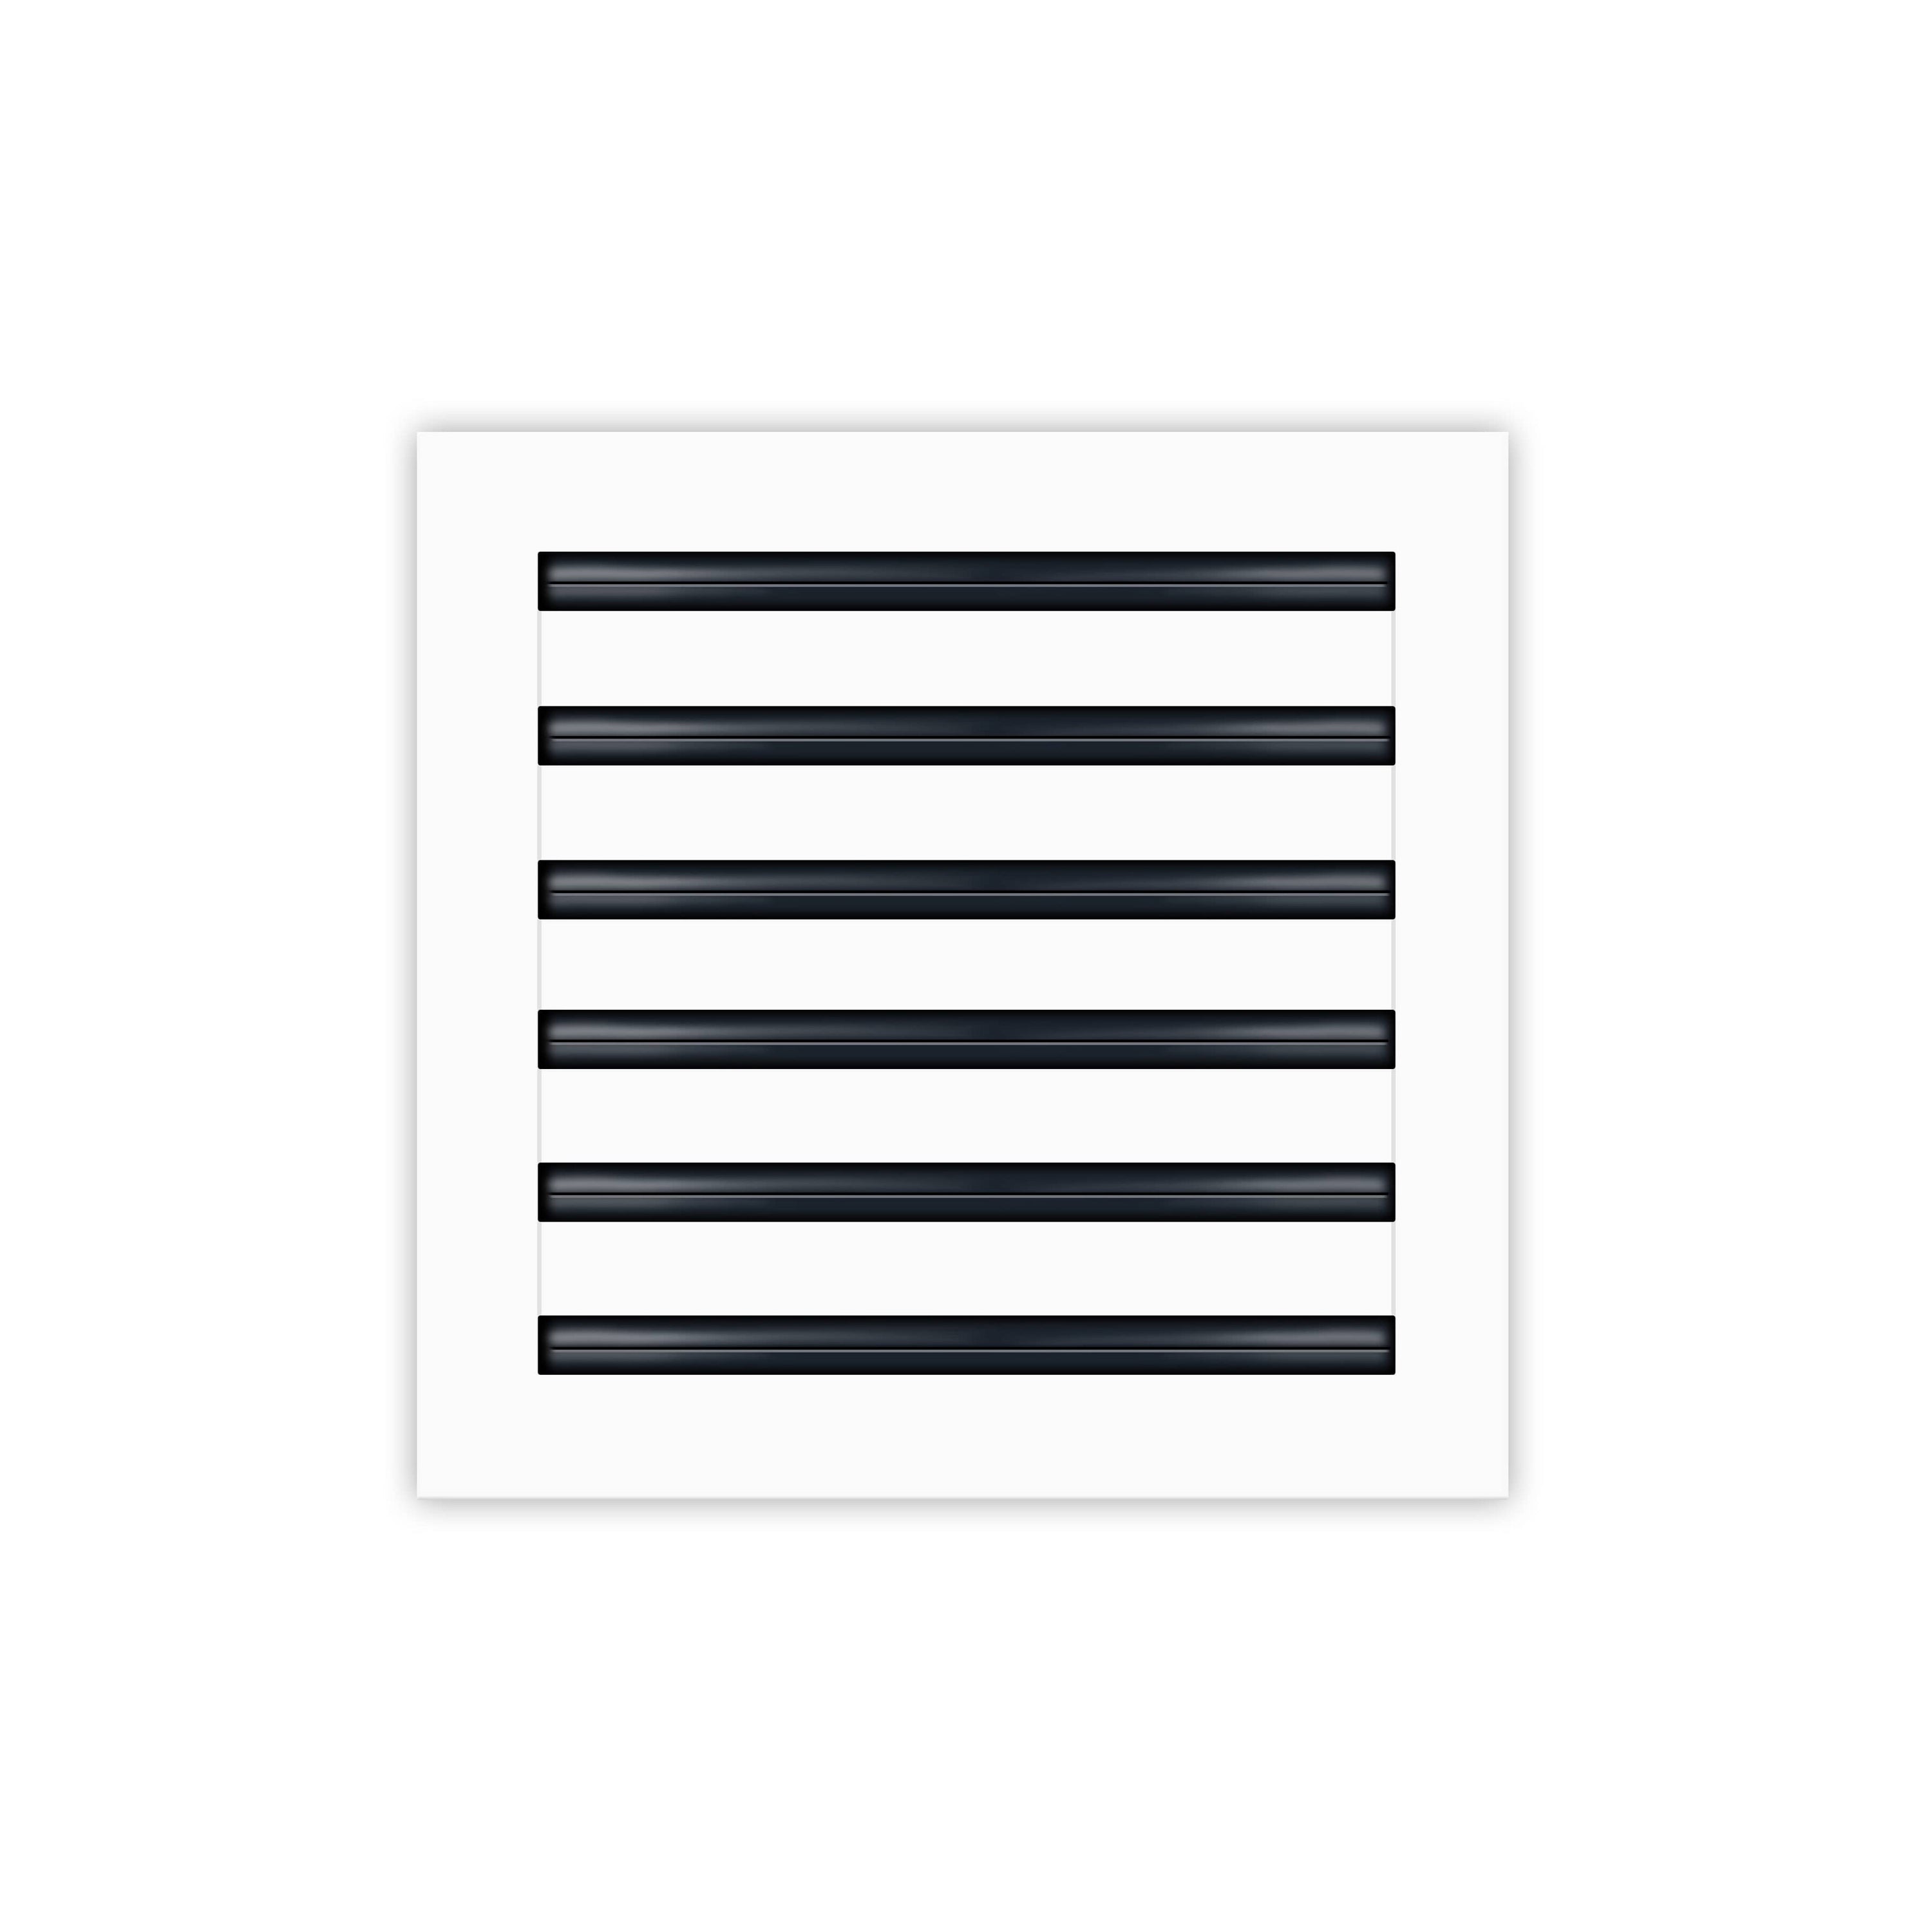 12x12 Modern AC Vent Cover - Decorative White Air Vent - Standard Linear Slot Diffuser - Register Grille for Ceiling, Walls & Floors - Texas Buildmart